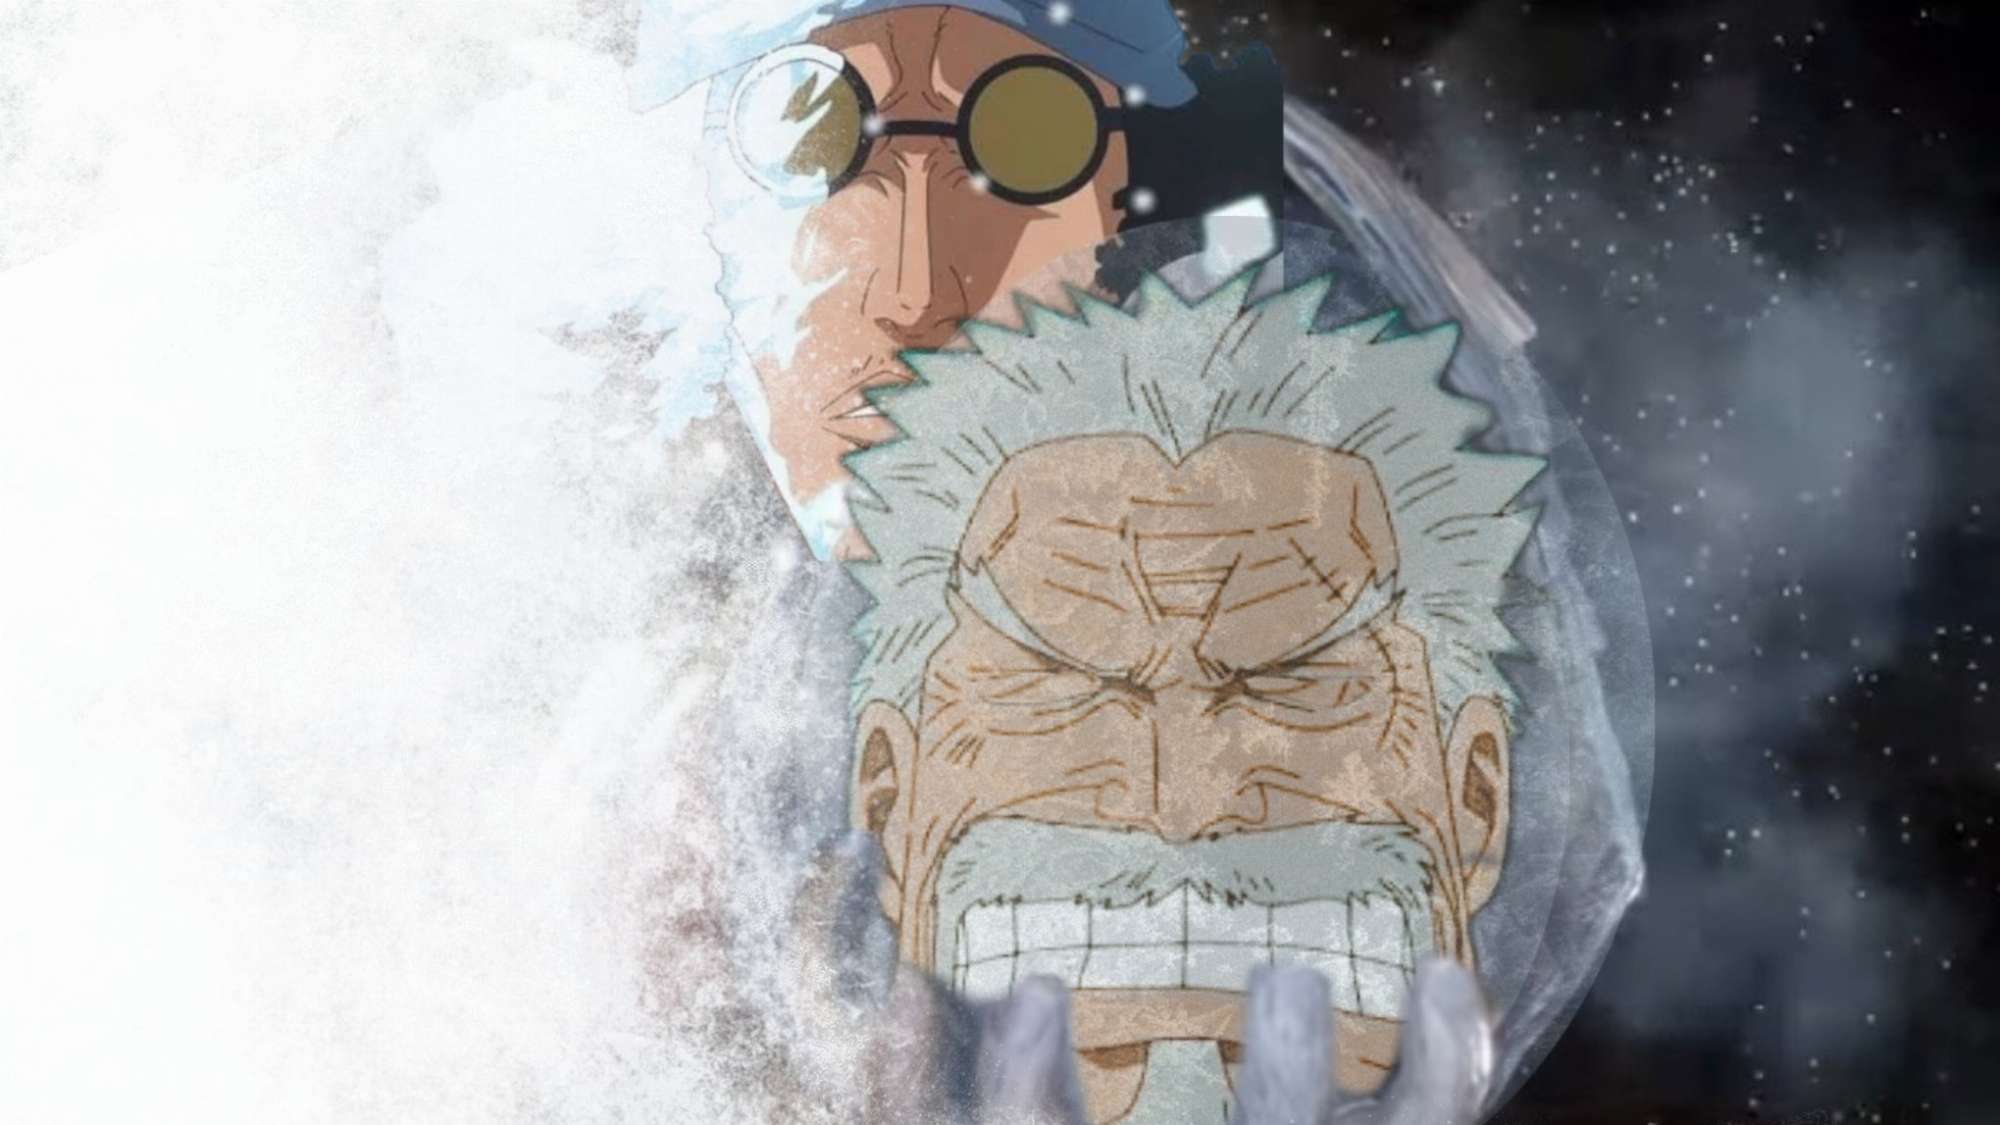 One Piece 1087 Spoiler: Being 'stealed' by Shiryu, Garp's life is in danger